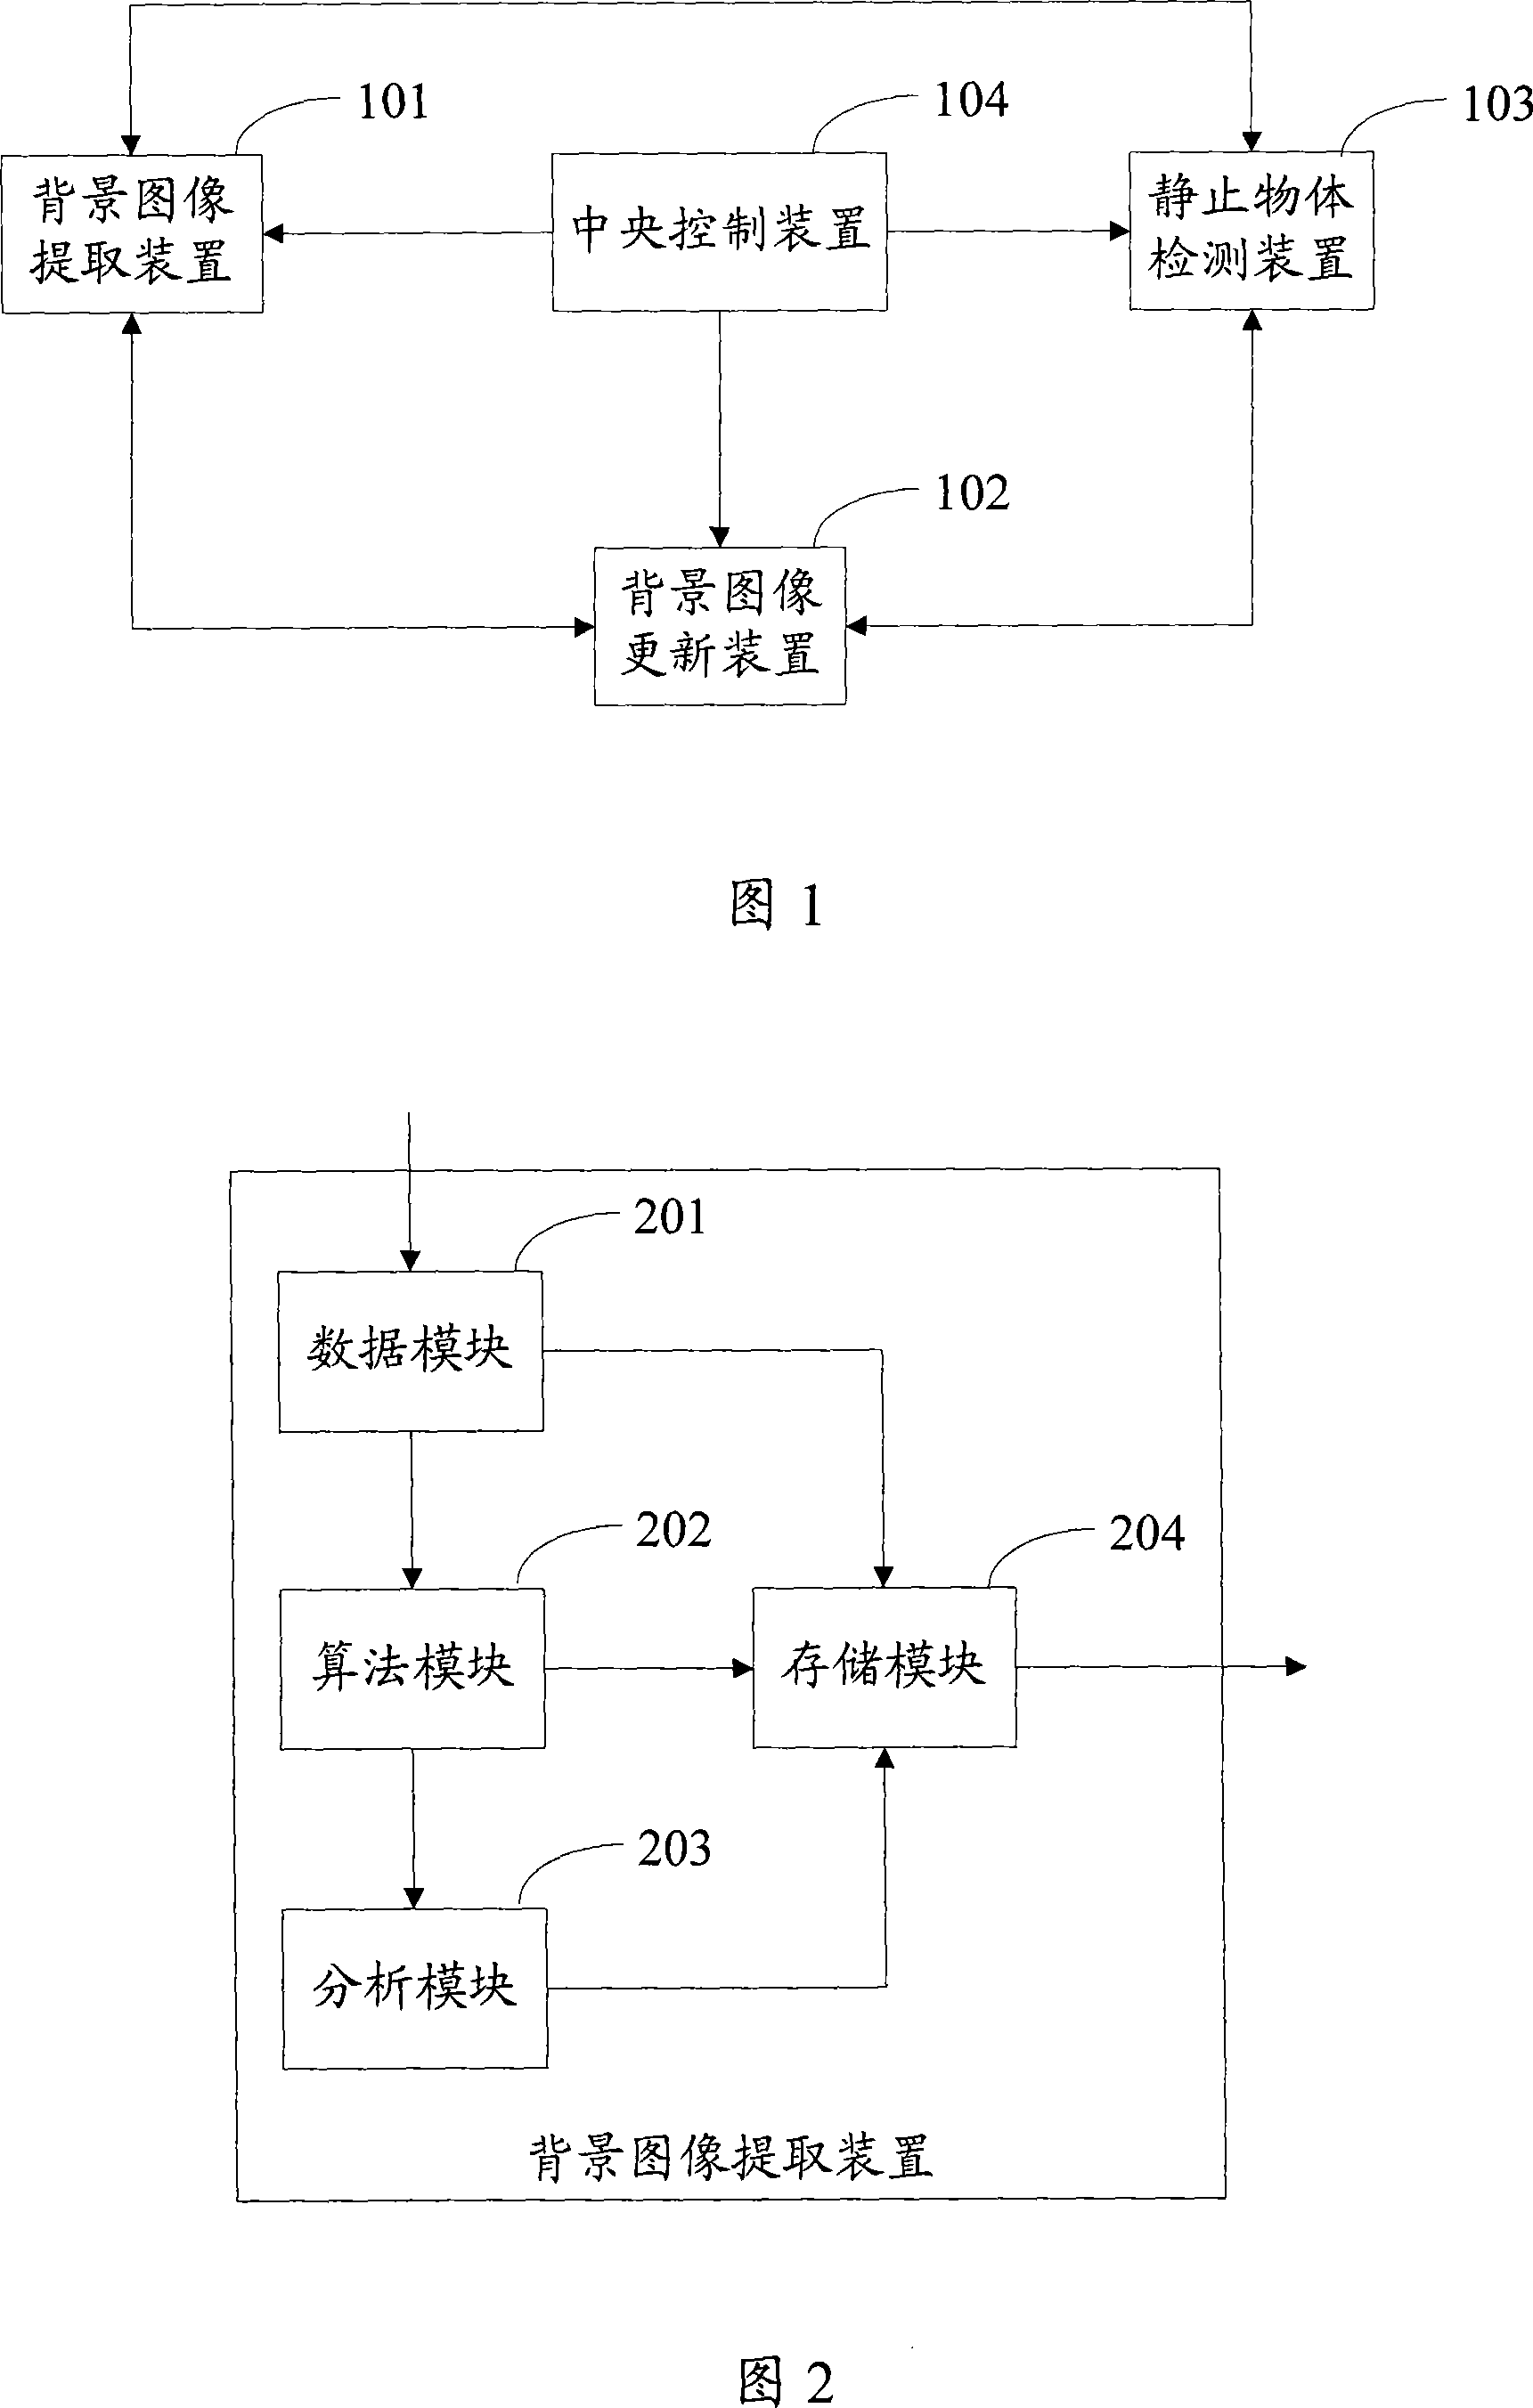 Static object detecting method and system